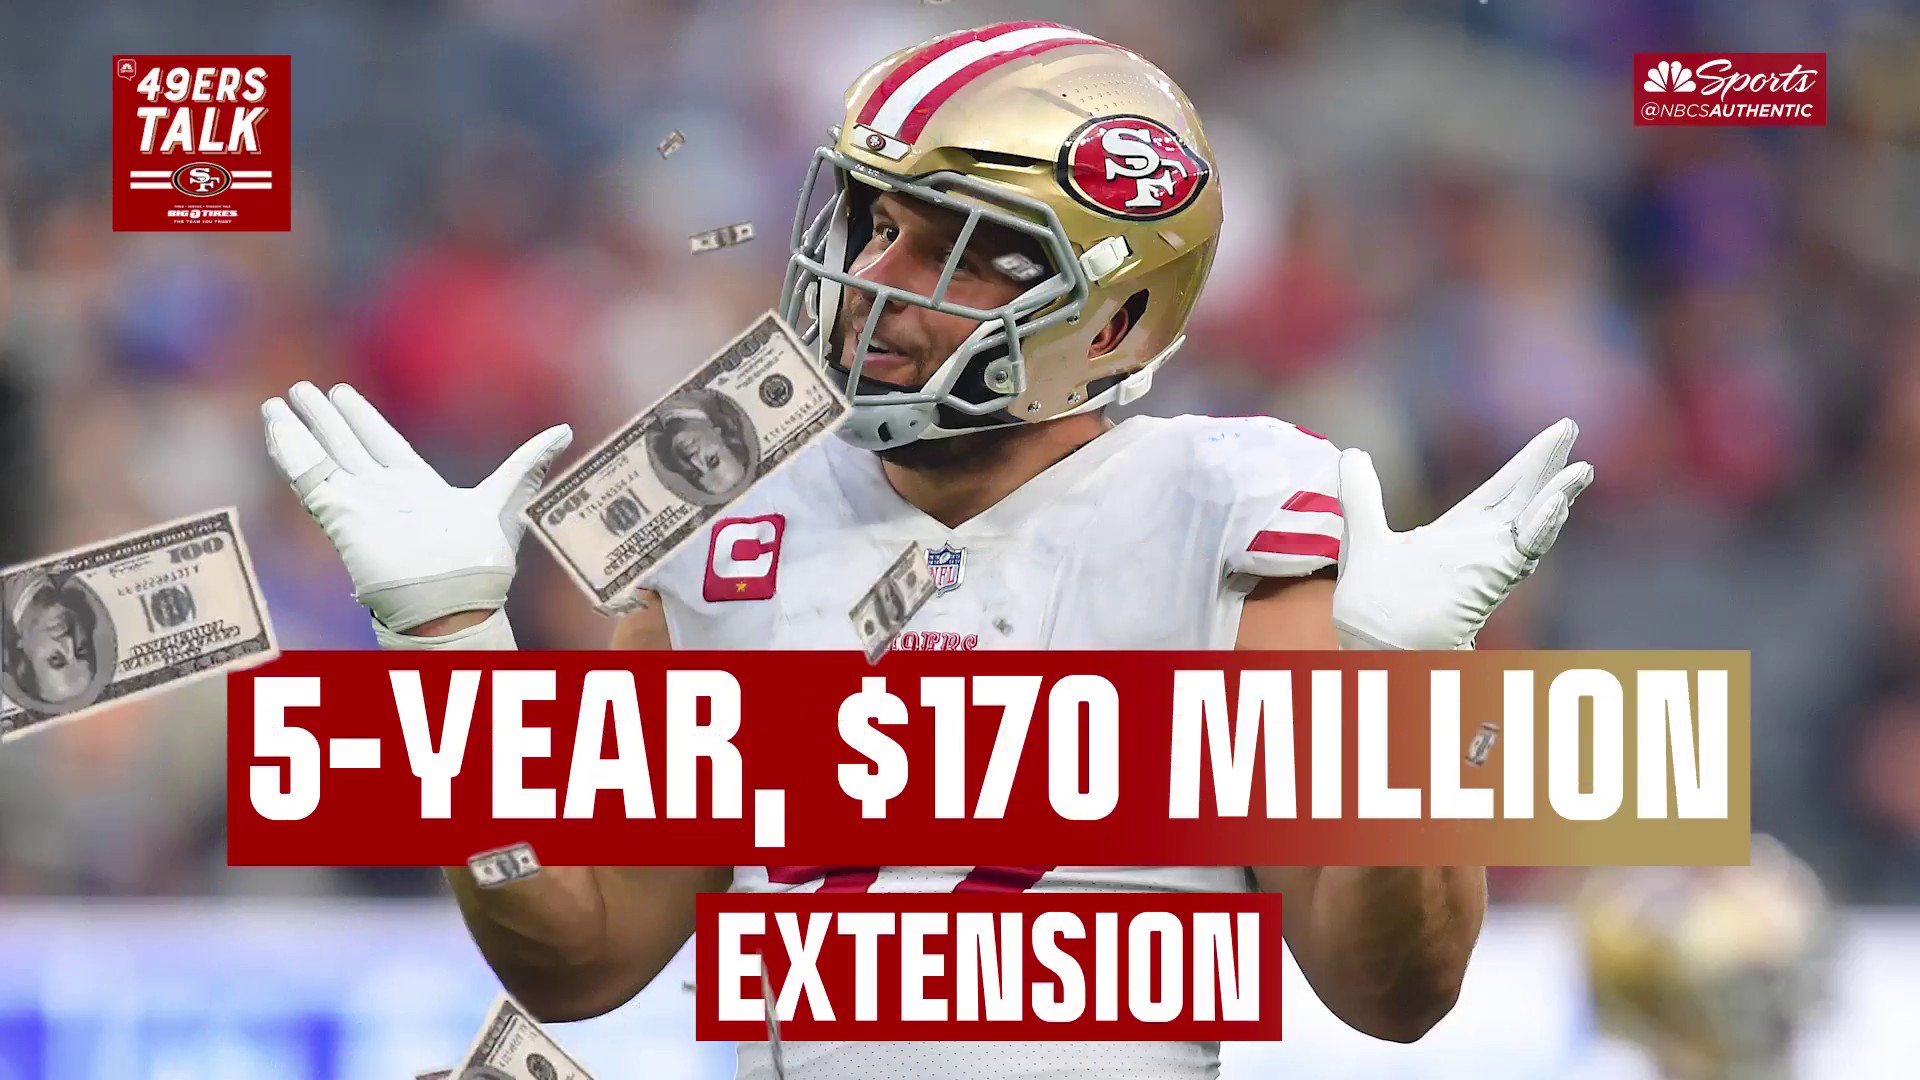 49ers' Nick Bosa agrees to record-setting $170M extension